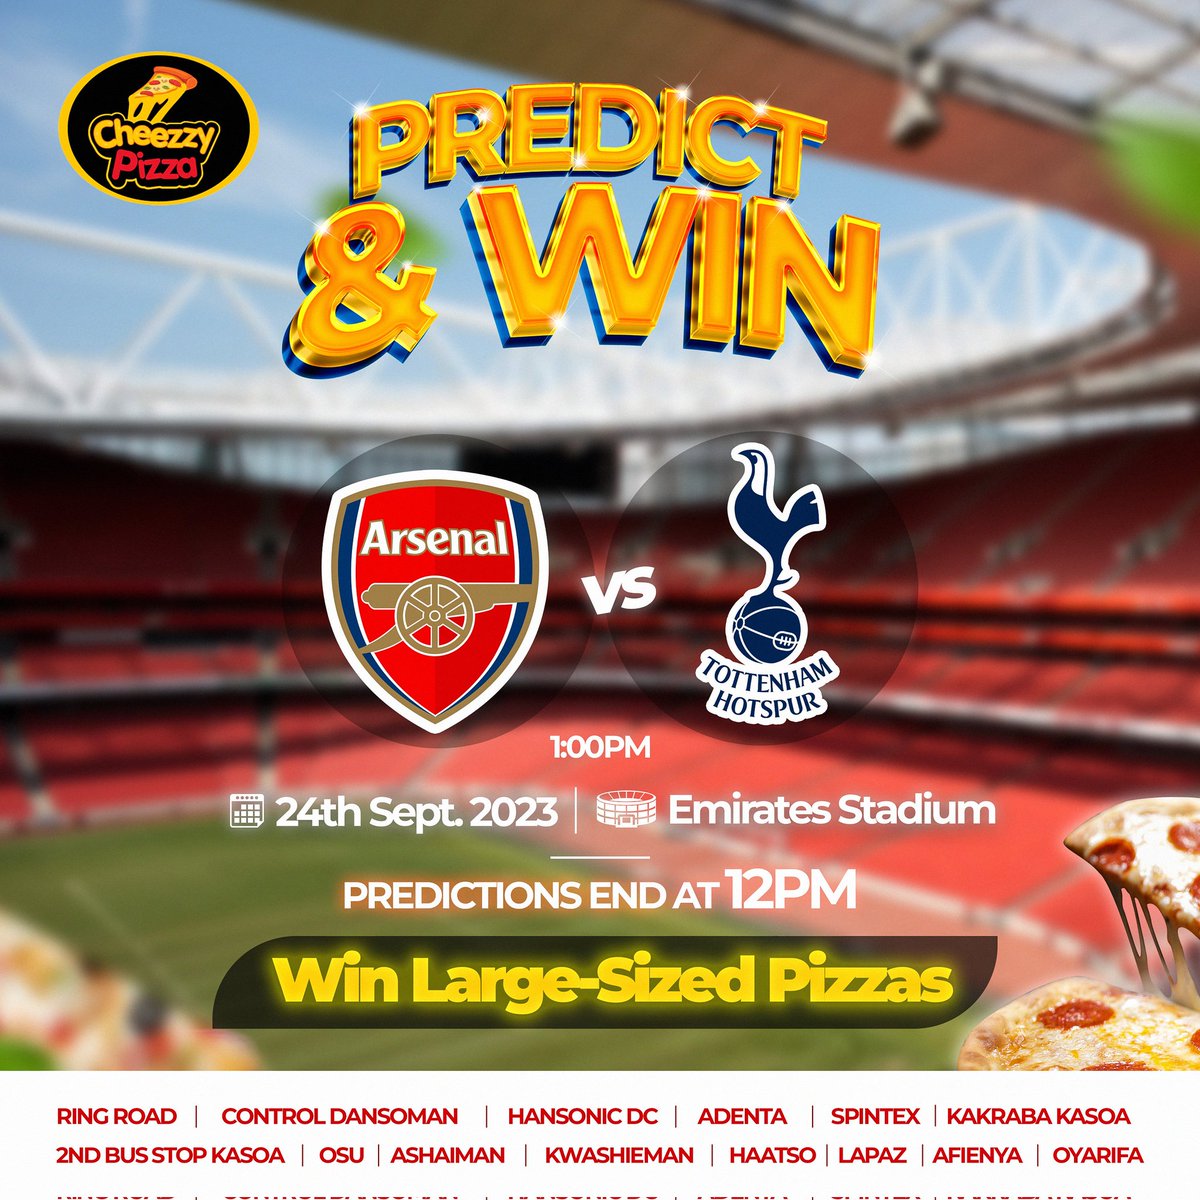 Arsenal vs Tottenham, who wins? Predict correctly & stand the chance of winning large-sized pizzas

Let us know your predictions 

How to Win:
🌟 You must be following our page
🌟 You must use  #CheezzyPredict 
🌟 1st correct scoreline prediction wins

#ARSMUN